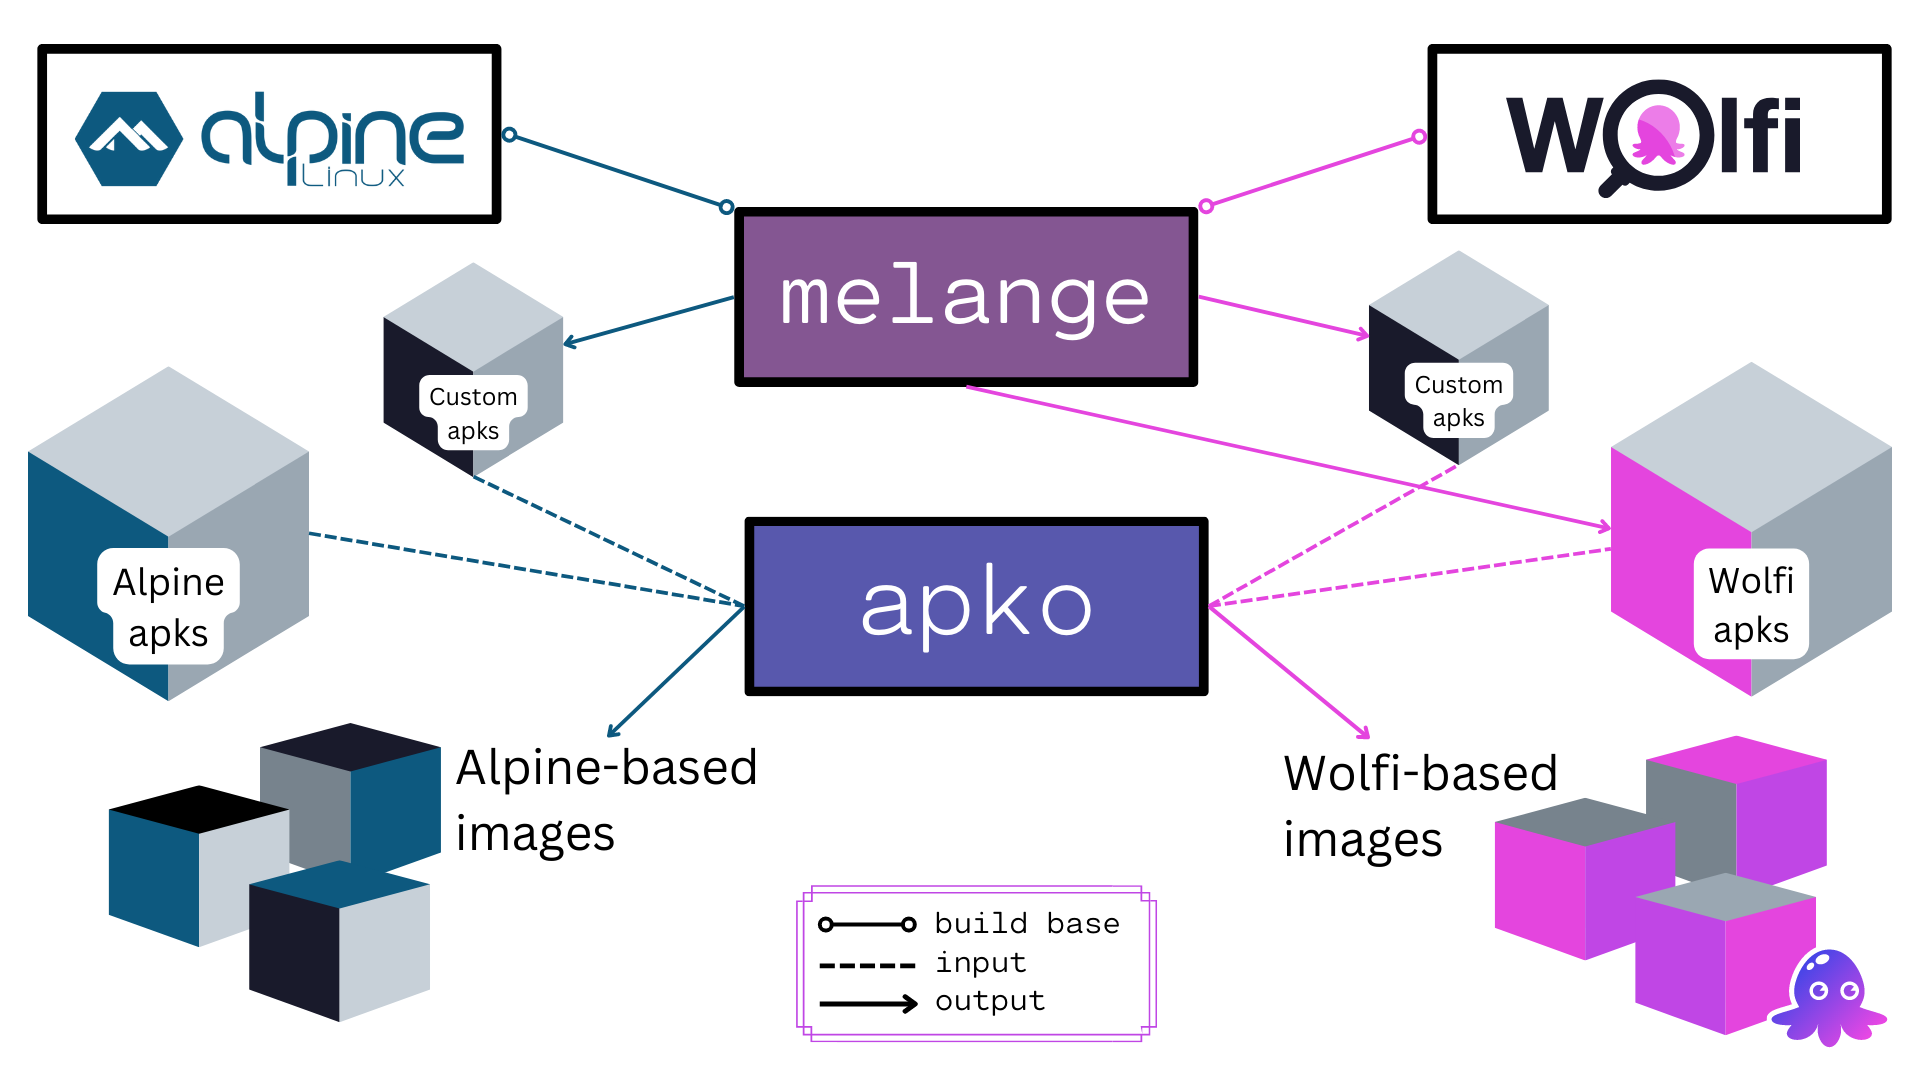 The following image contains an overview of the apko ecosystem and how it interacts with melange for building apk-based images, using either Alpine or Wolfi as base system.